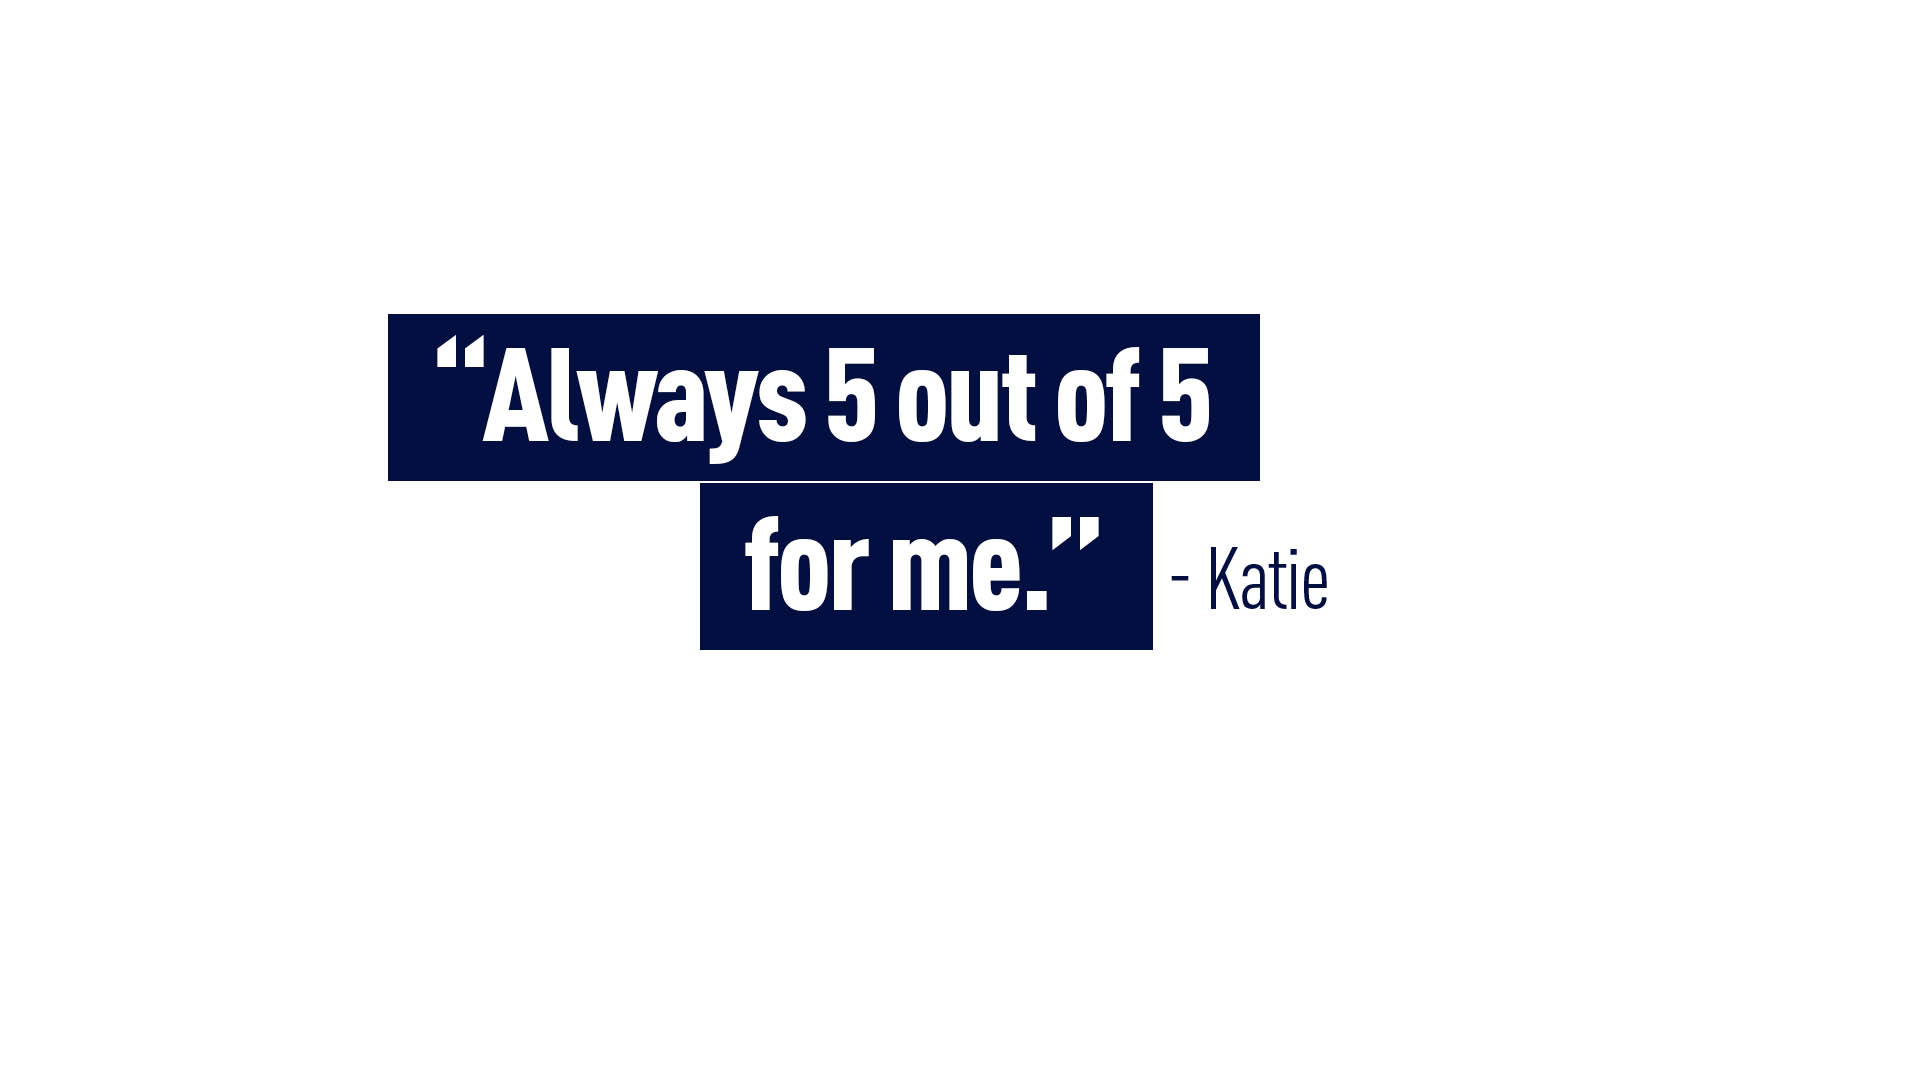 “Always 5 out of 5 for me.” - Katie